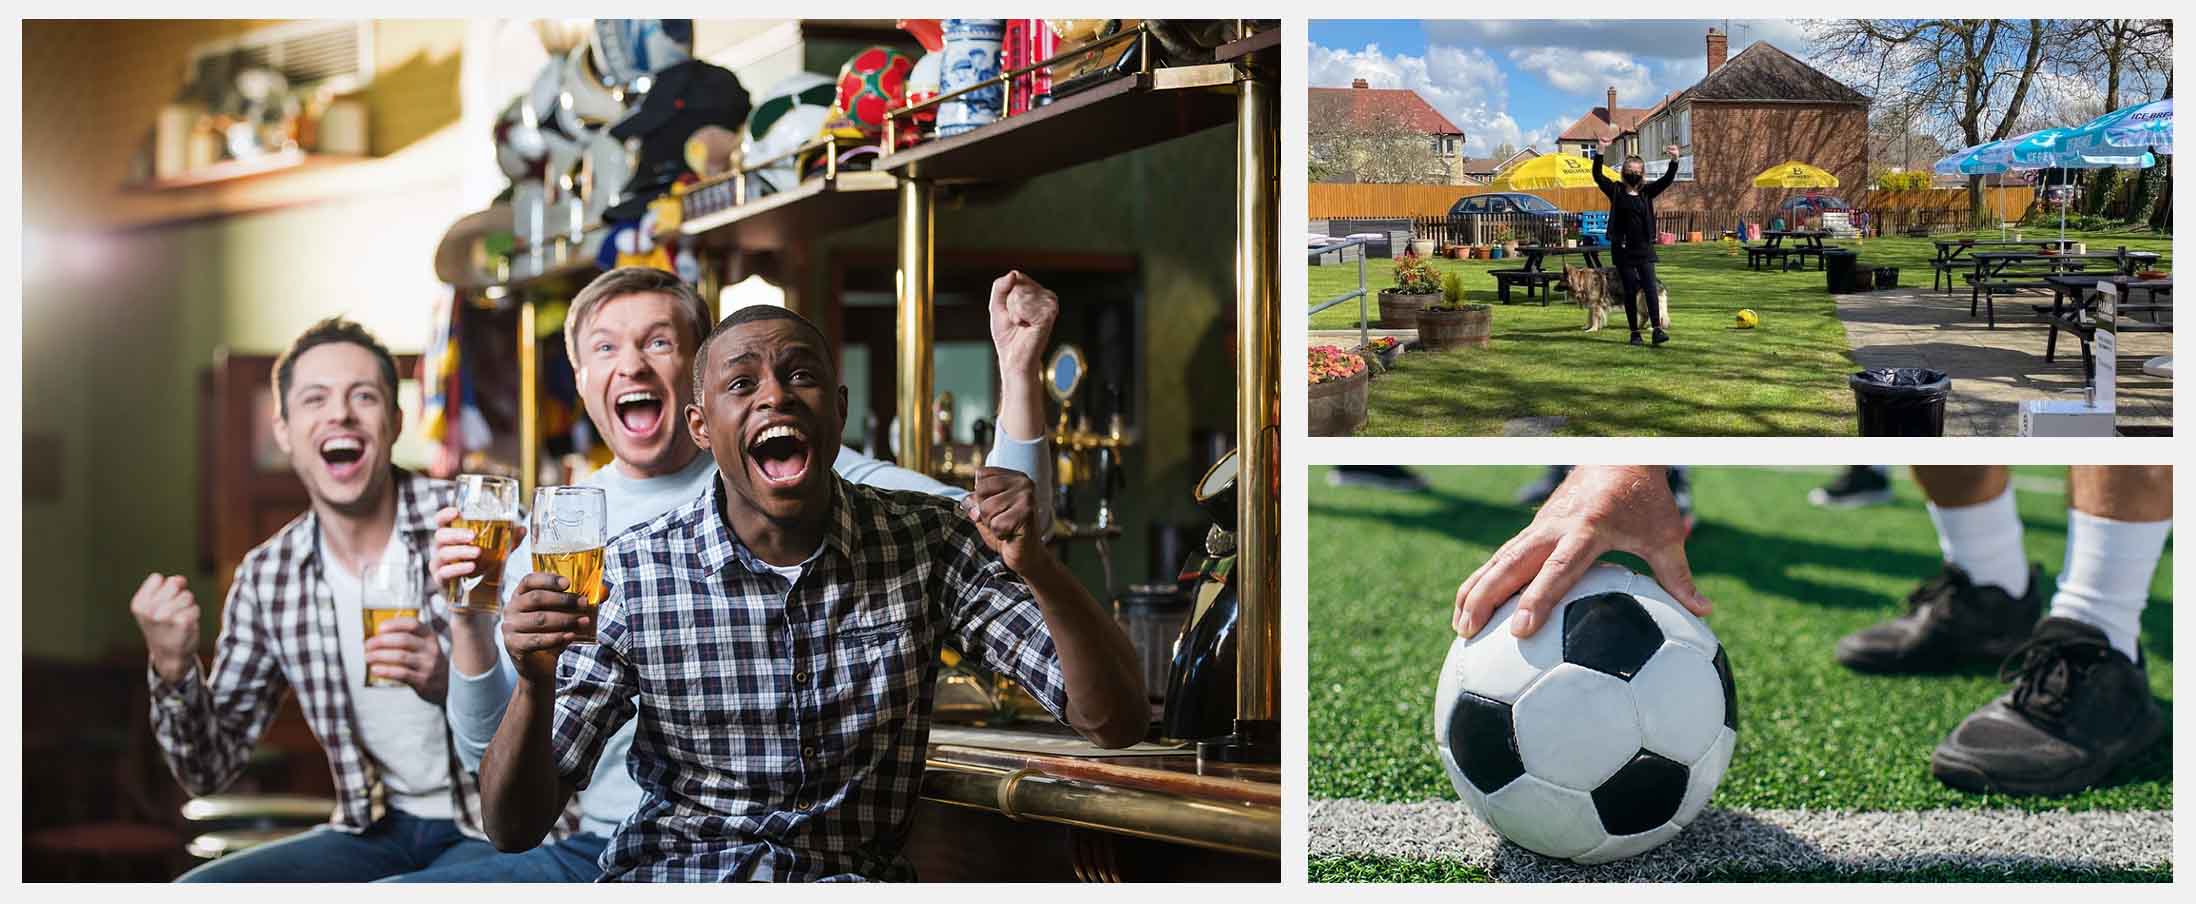 Best Sports Bars in Cambridge - The Red Lion